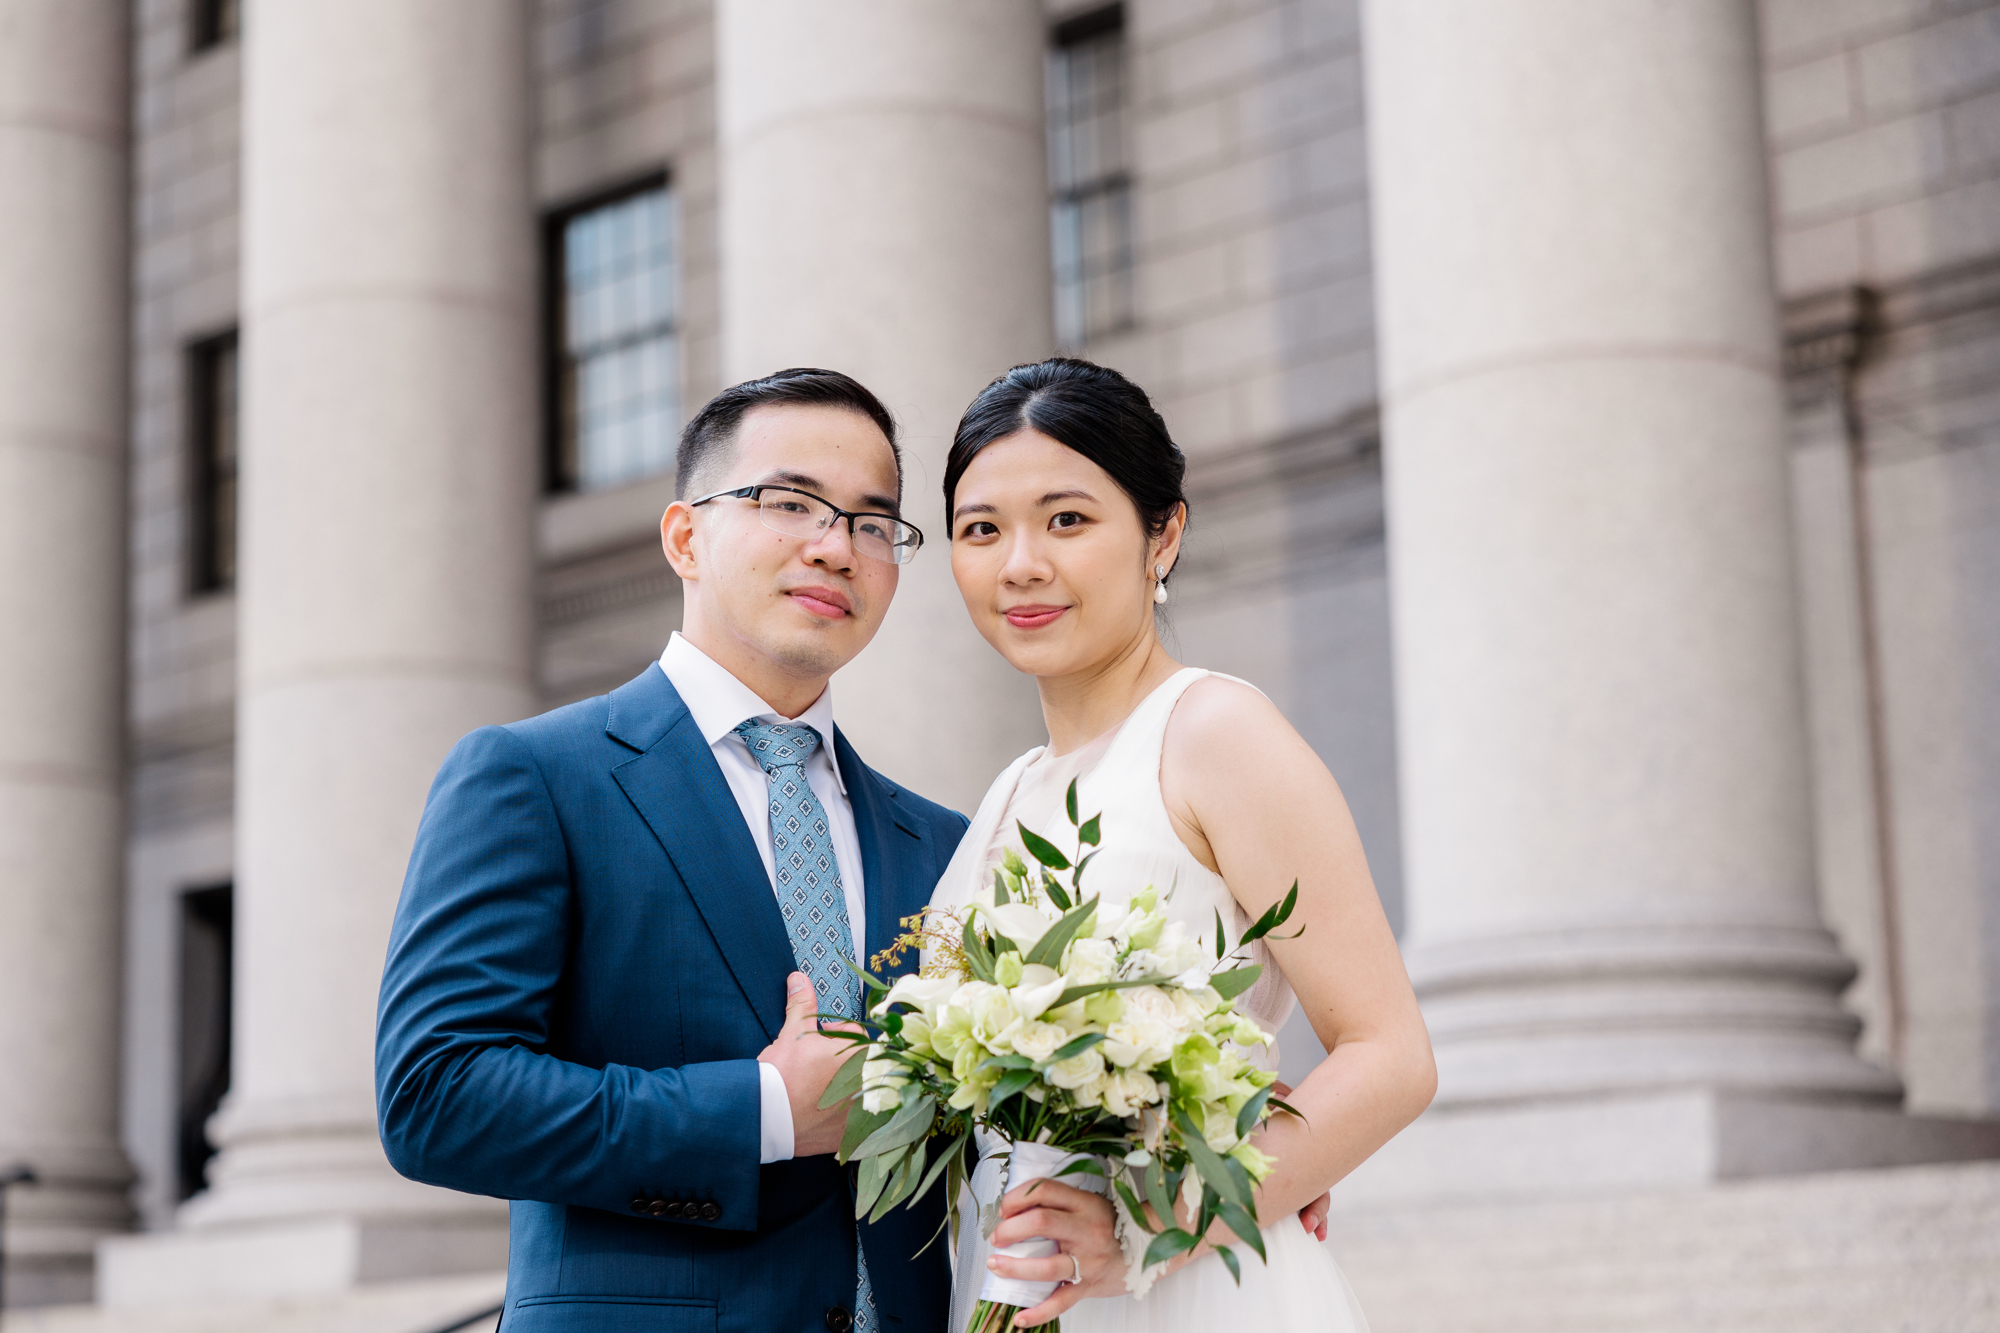 Personal NYC Elopement Photography